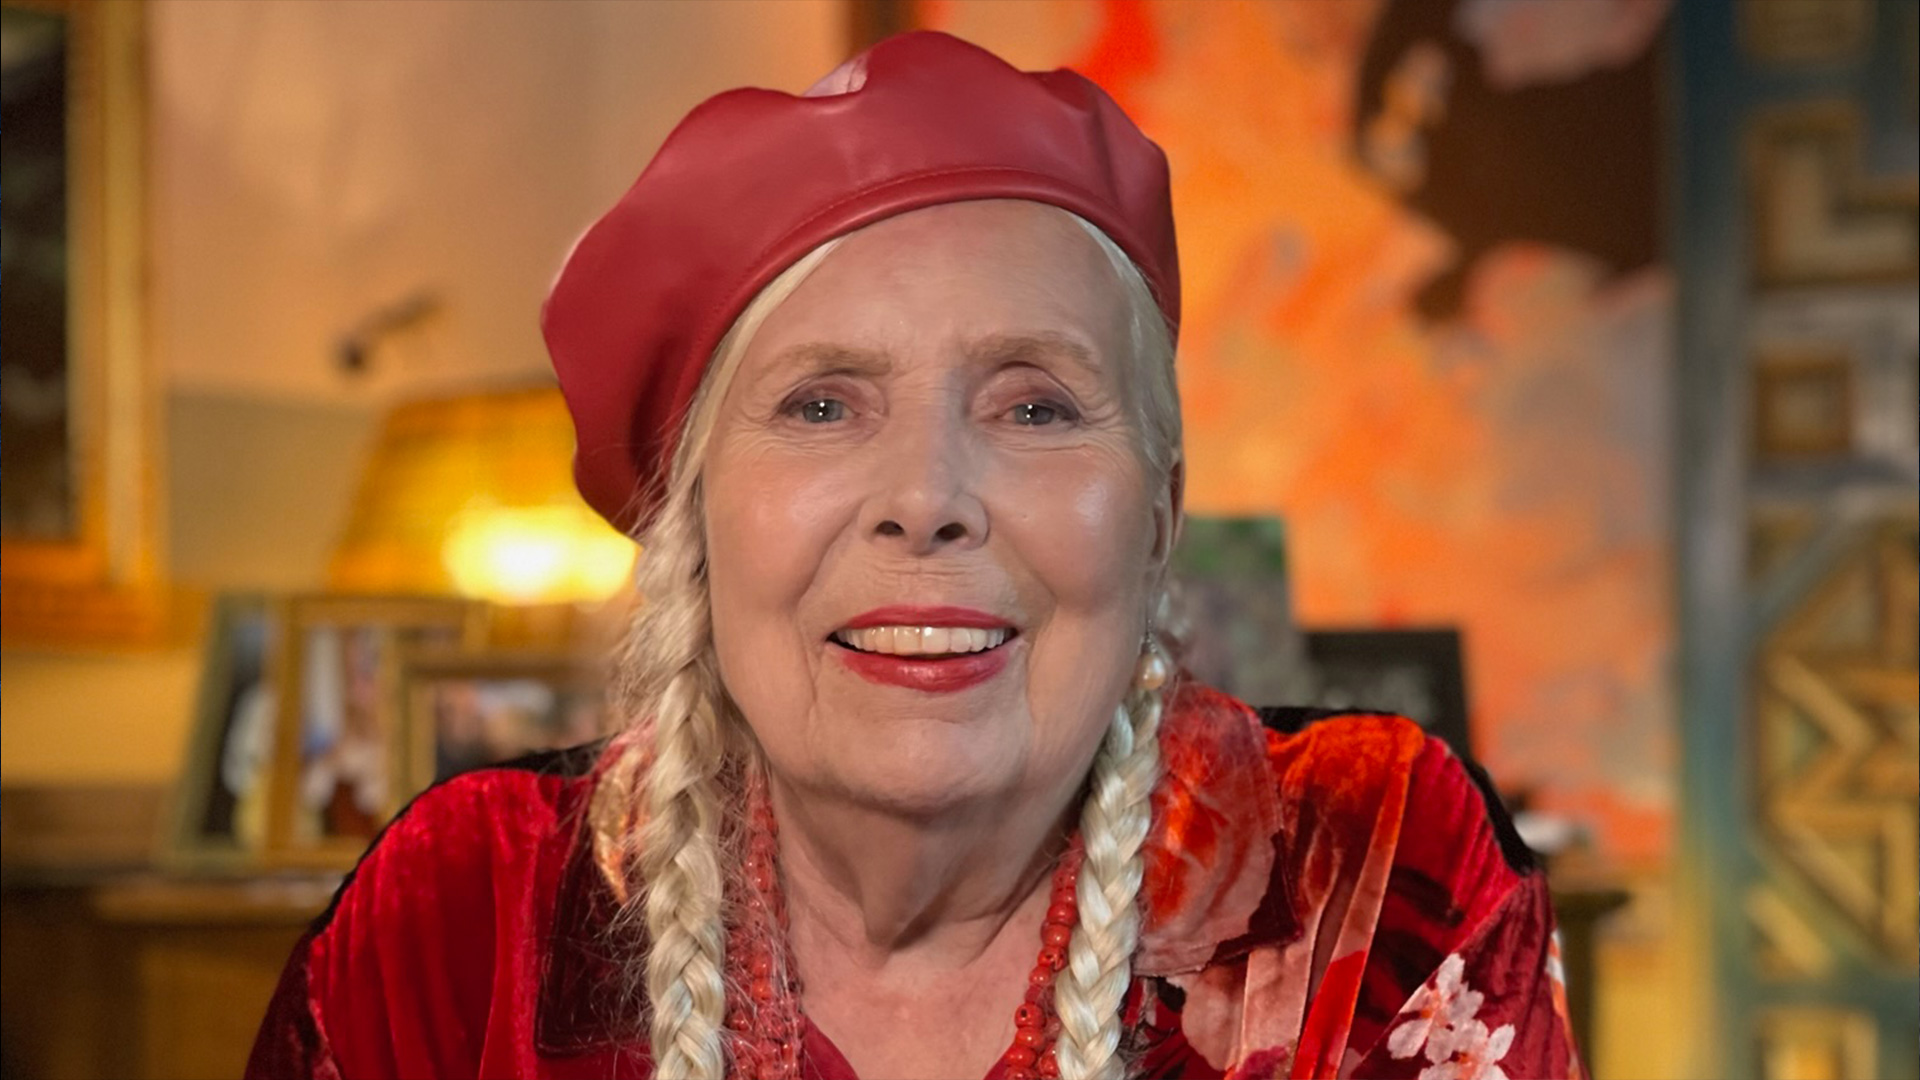 Joni Mitchell smiles in a red hat and blouse